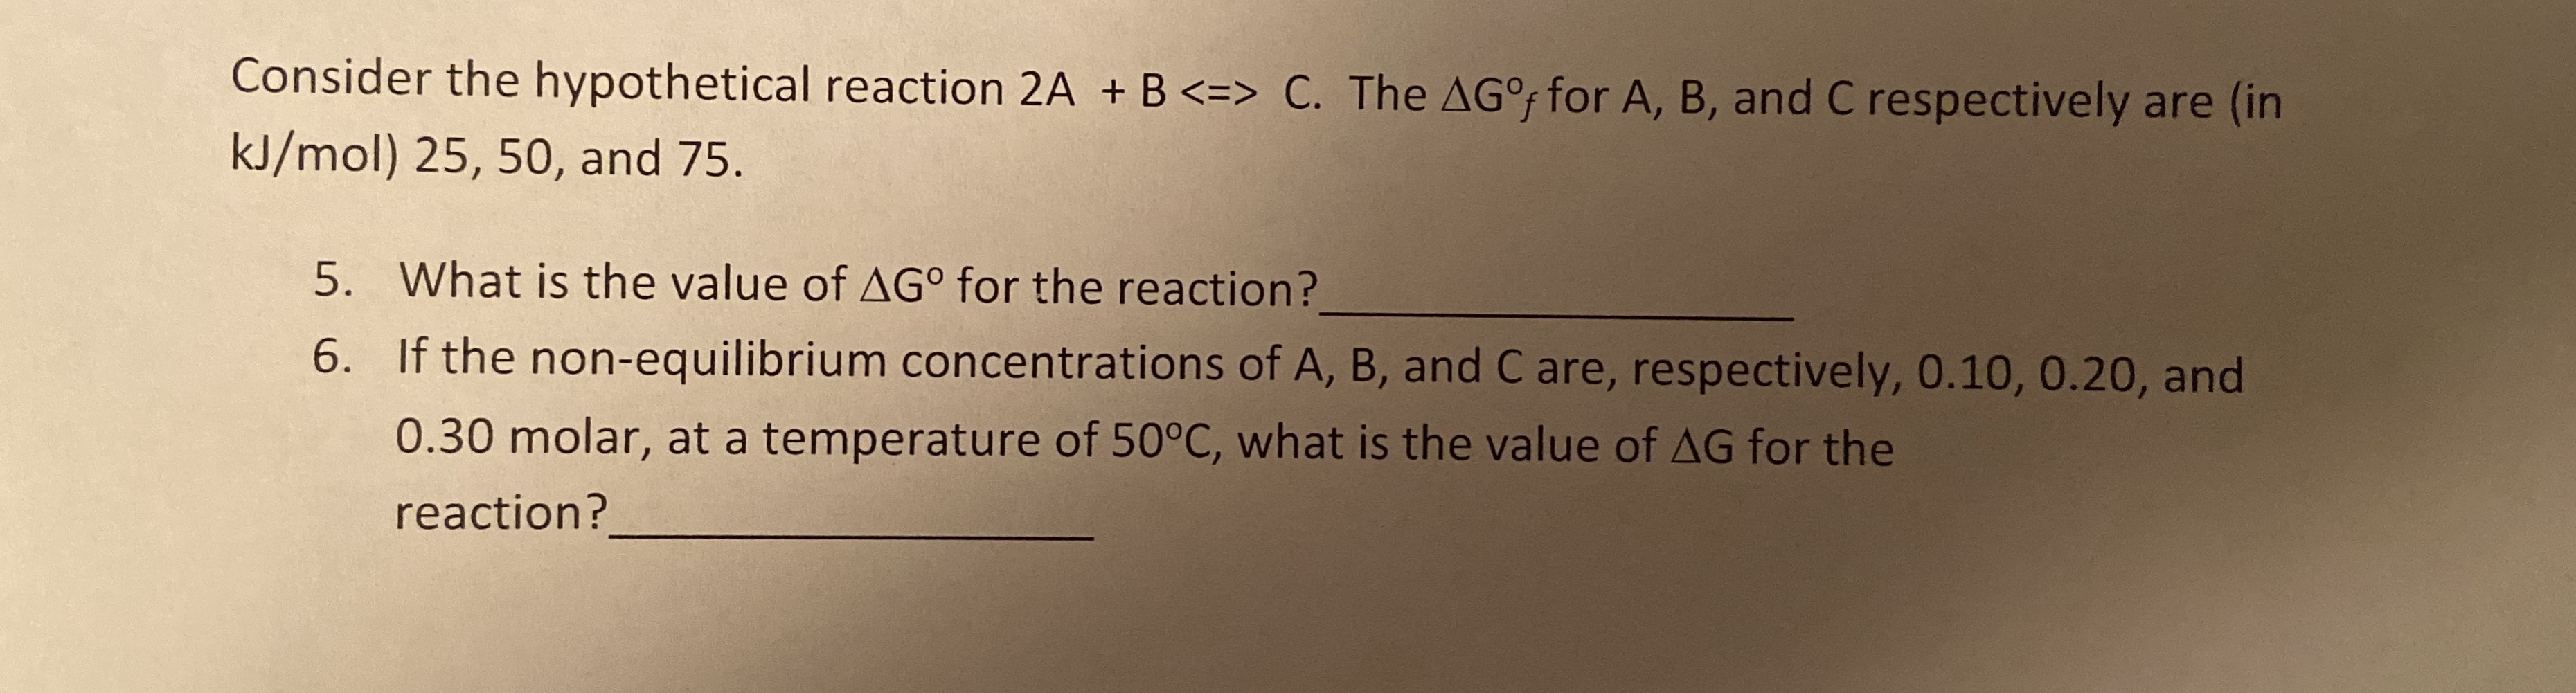 Consider the hypothetical reaction 2A + B <=> C. The AGo for A, B, and C respectively are (in
kJ/mol) 25, 50, and 75.
5. What is the value of AGo for the reaction?
6. If the non-equilibrium concentrations of A, B, and C are, respectively, 0.10, 0.20, and
0.30 molar, at a temperature of 50°C, what is the value of AG for the
reaction?
